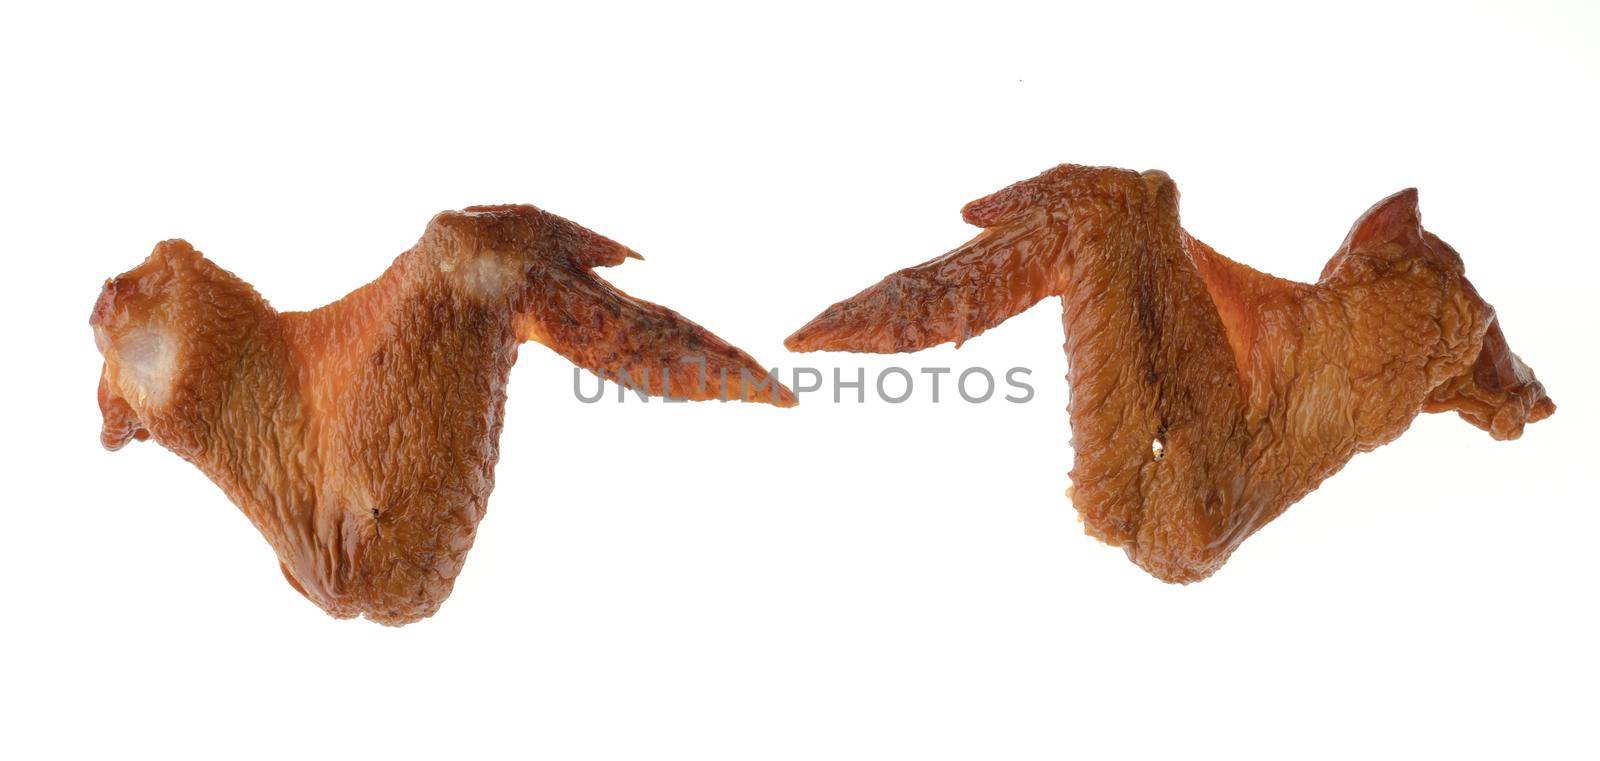 Smoked chicken wings on a white background in isolation